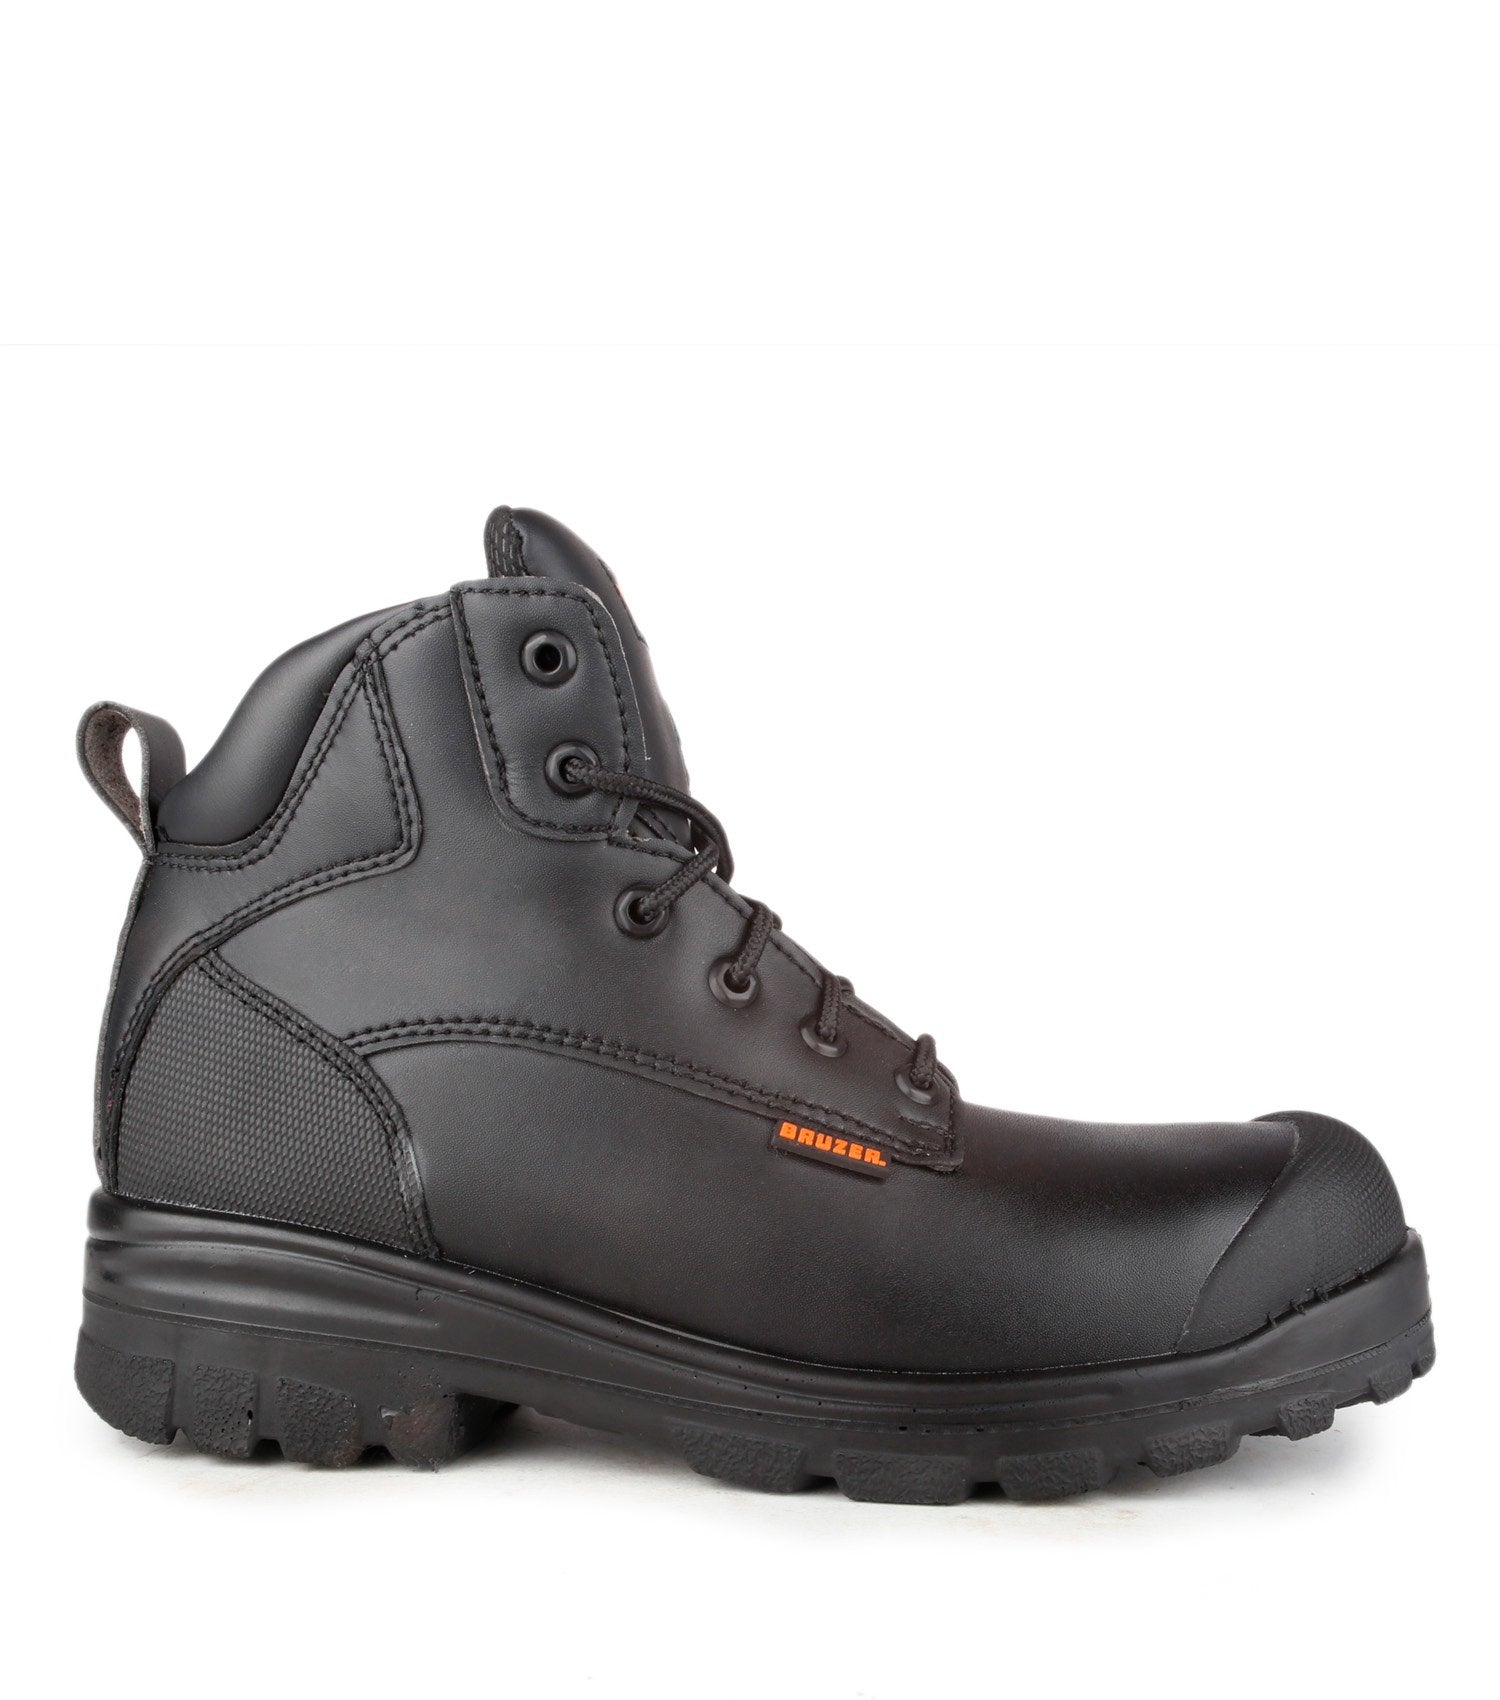 STC Trump 6" Chemtech Safety Boots | Black | Size 4 - 14 Work Boots - Cleanflow